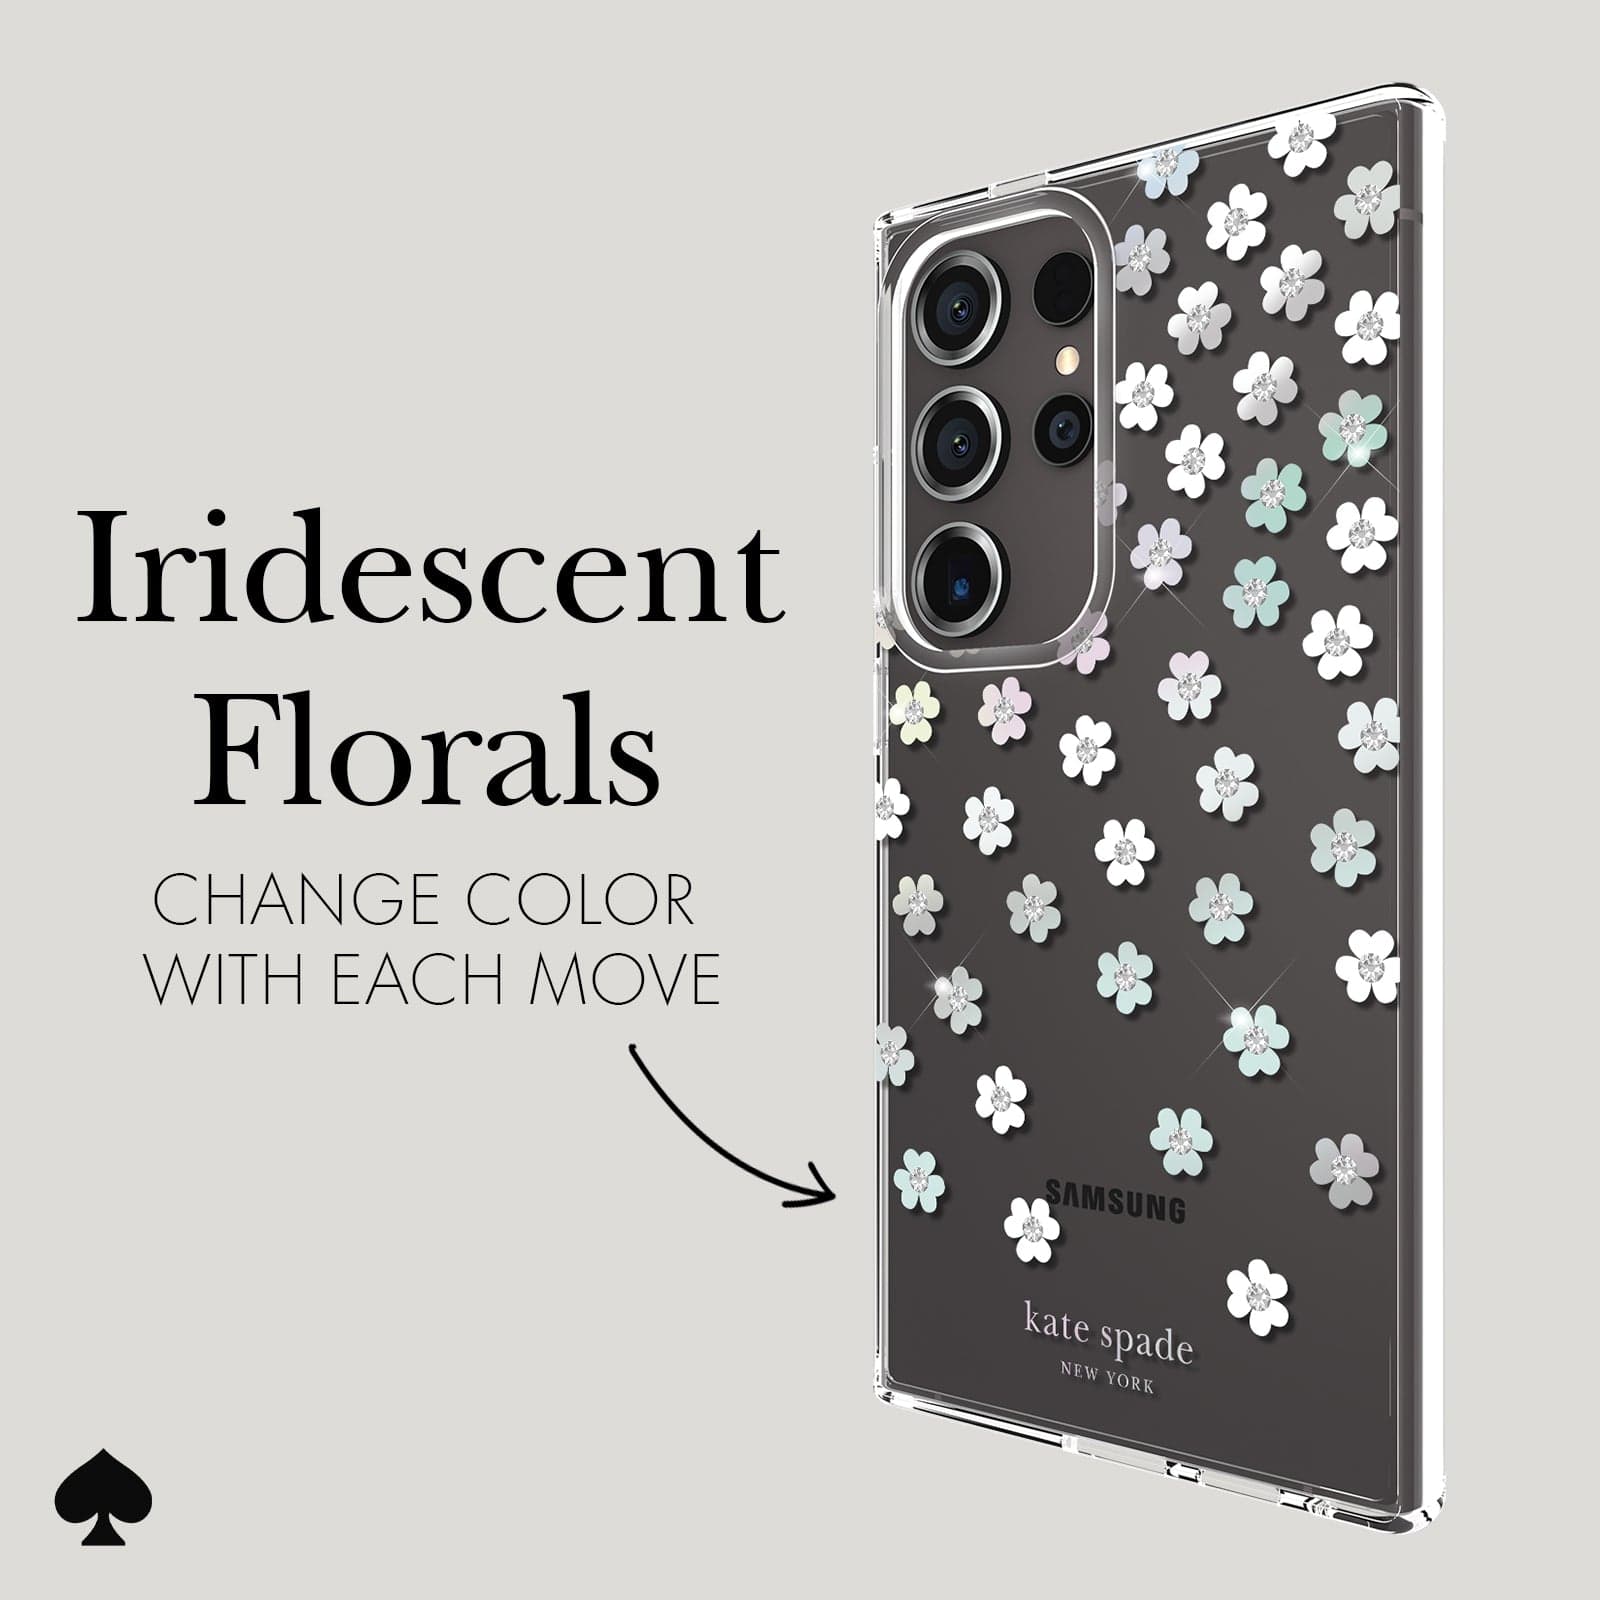 IRIDESCENT FLORALS. CHANGE COLOR WITH EACH MOVE